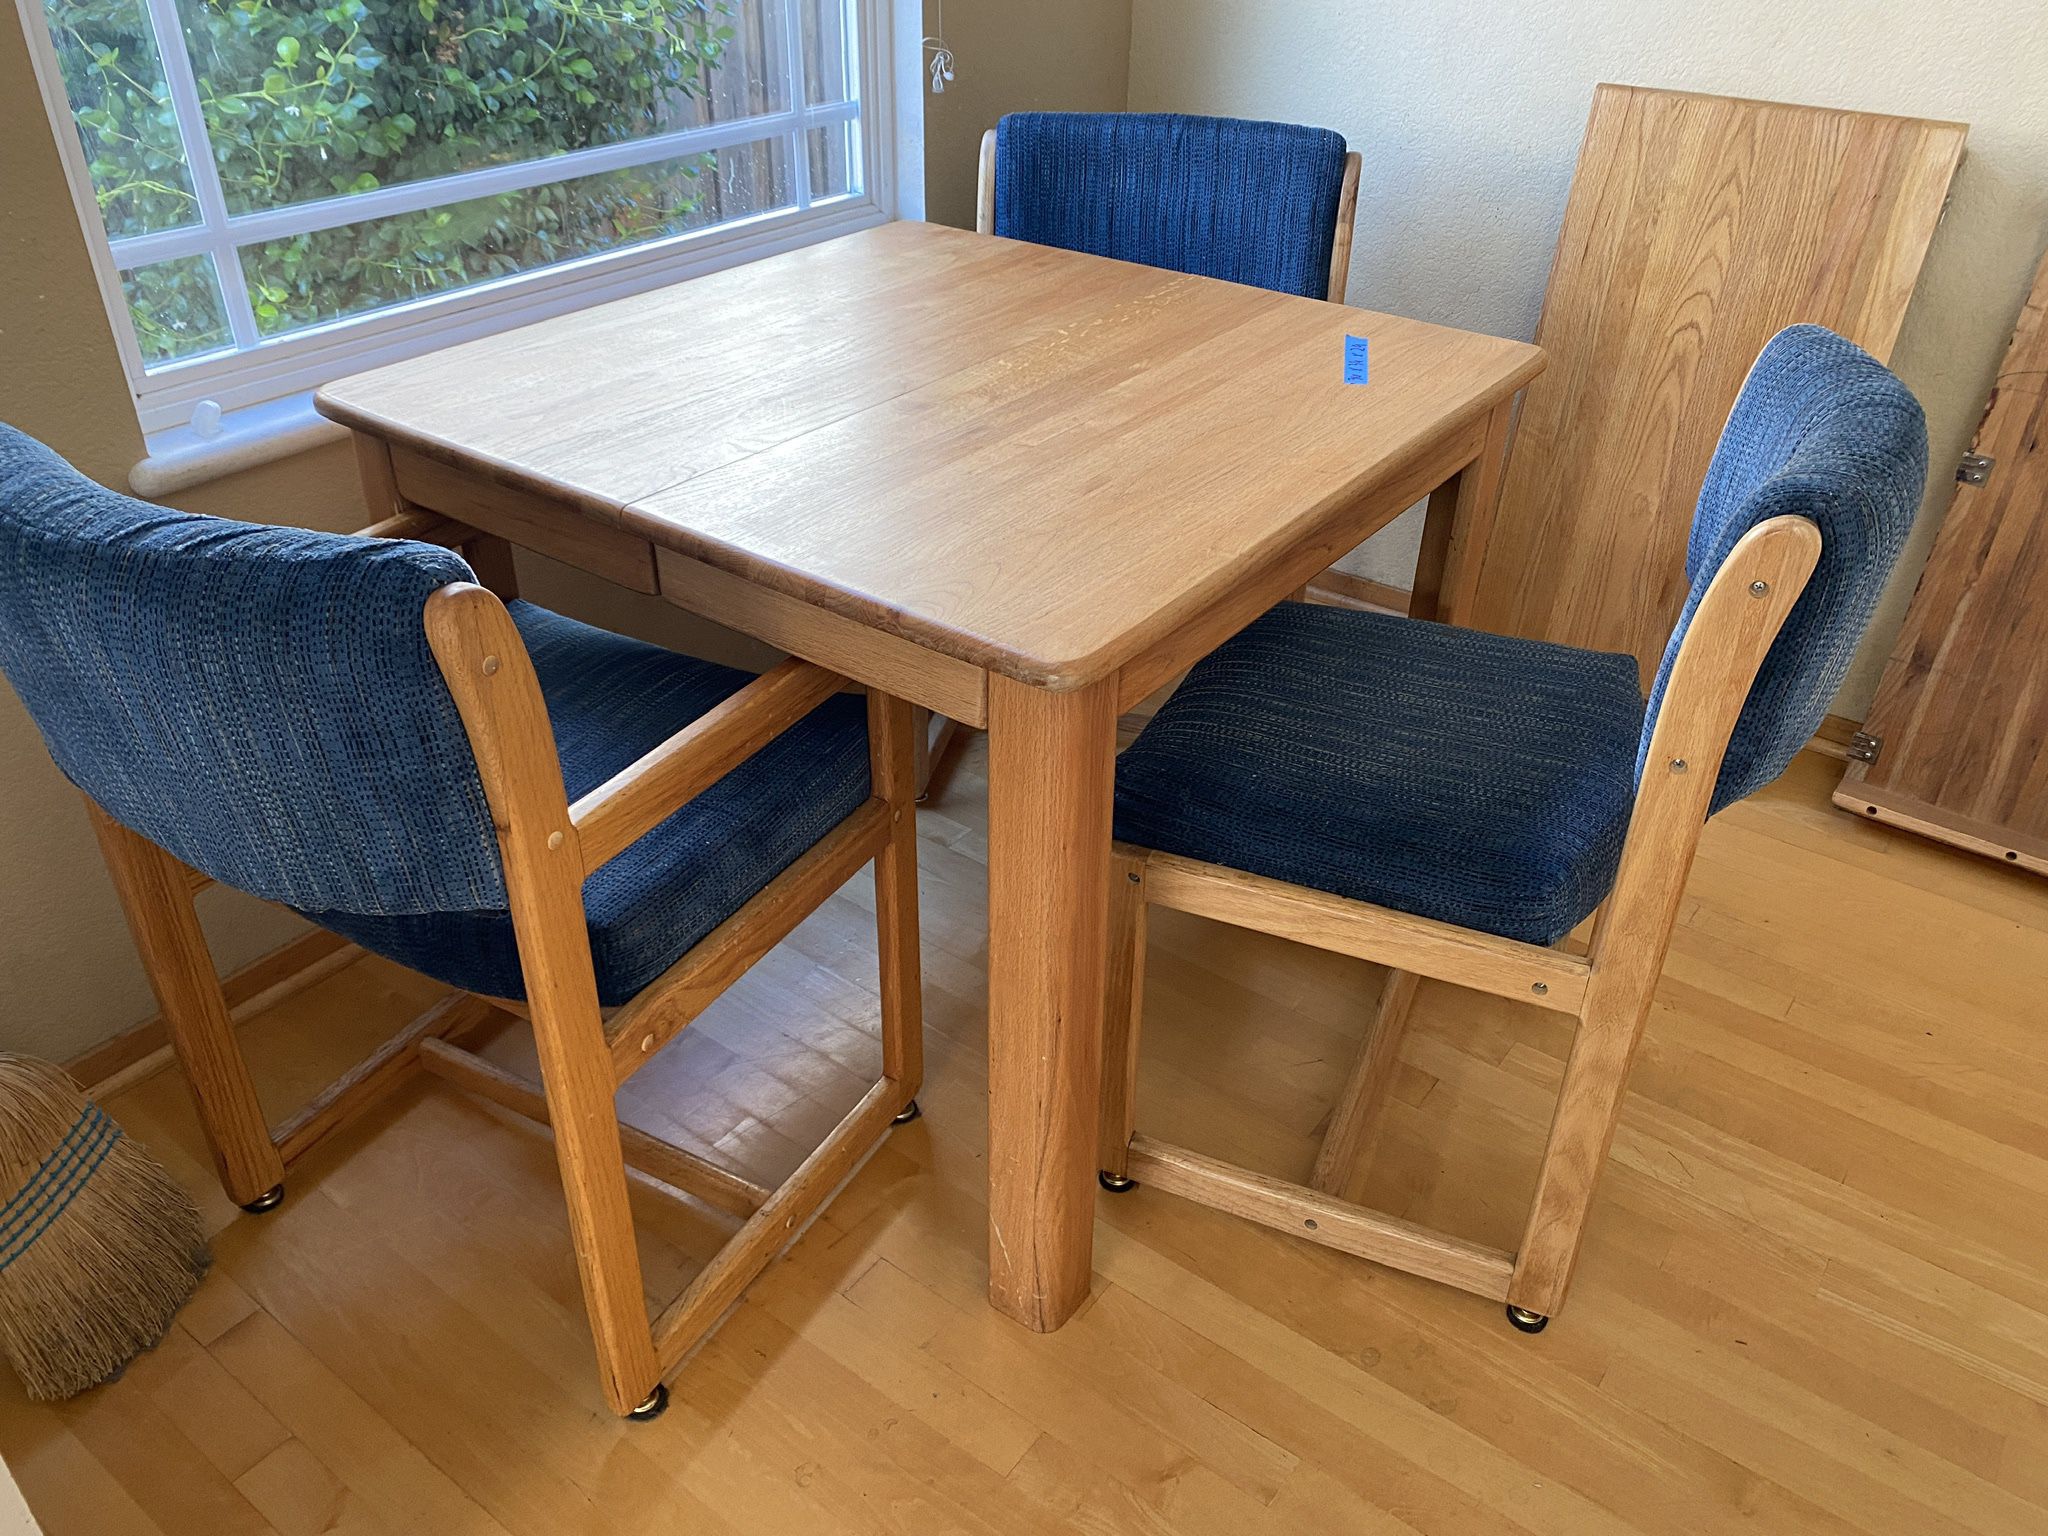 Breakfast Table With 5 Chairs 36x36x29